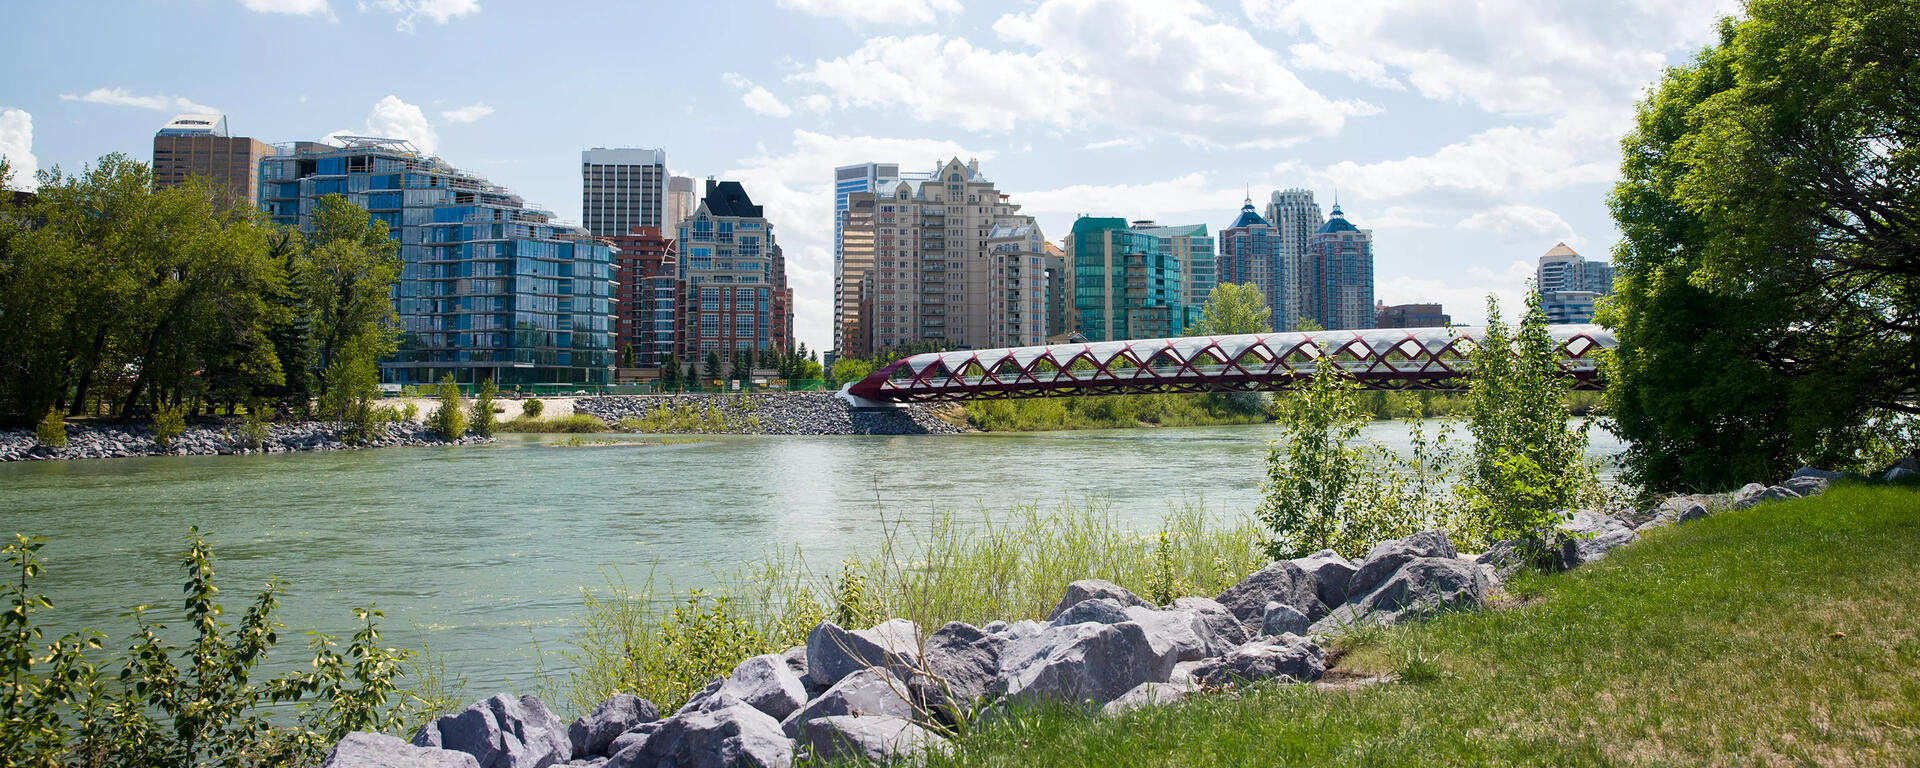 The Bow River is glacier-fed and, with melt rates increasing, water scarcity could be closer for Calgarians than we think